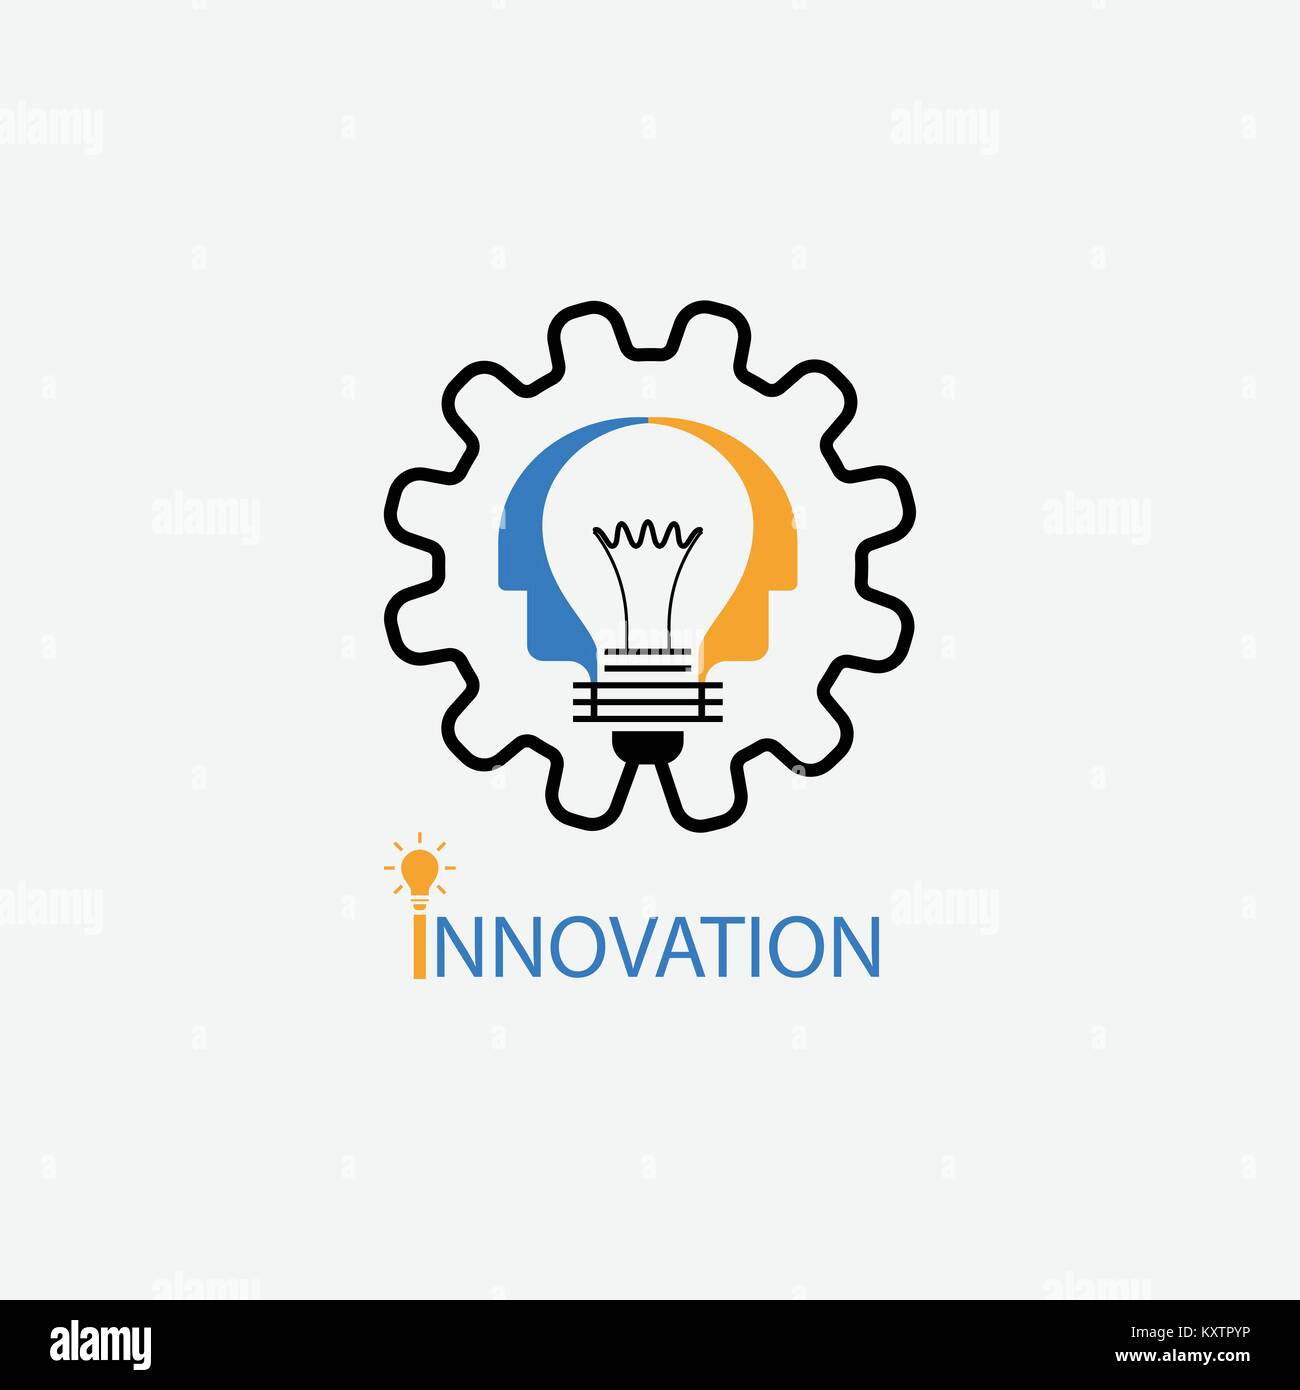 Creative light bulb,Gear icon and Human heads vector design banner template.Corporate business and industrial creative logotype symbol.Brainstorming a Stock Vector